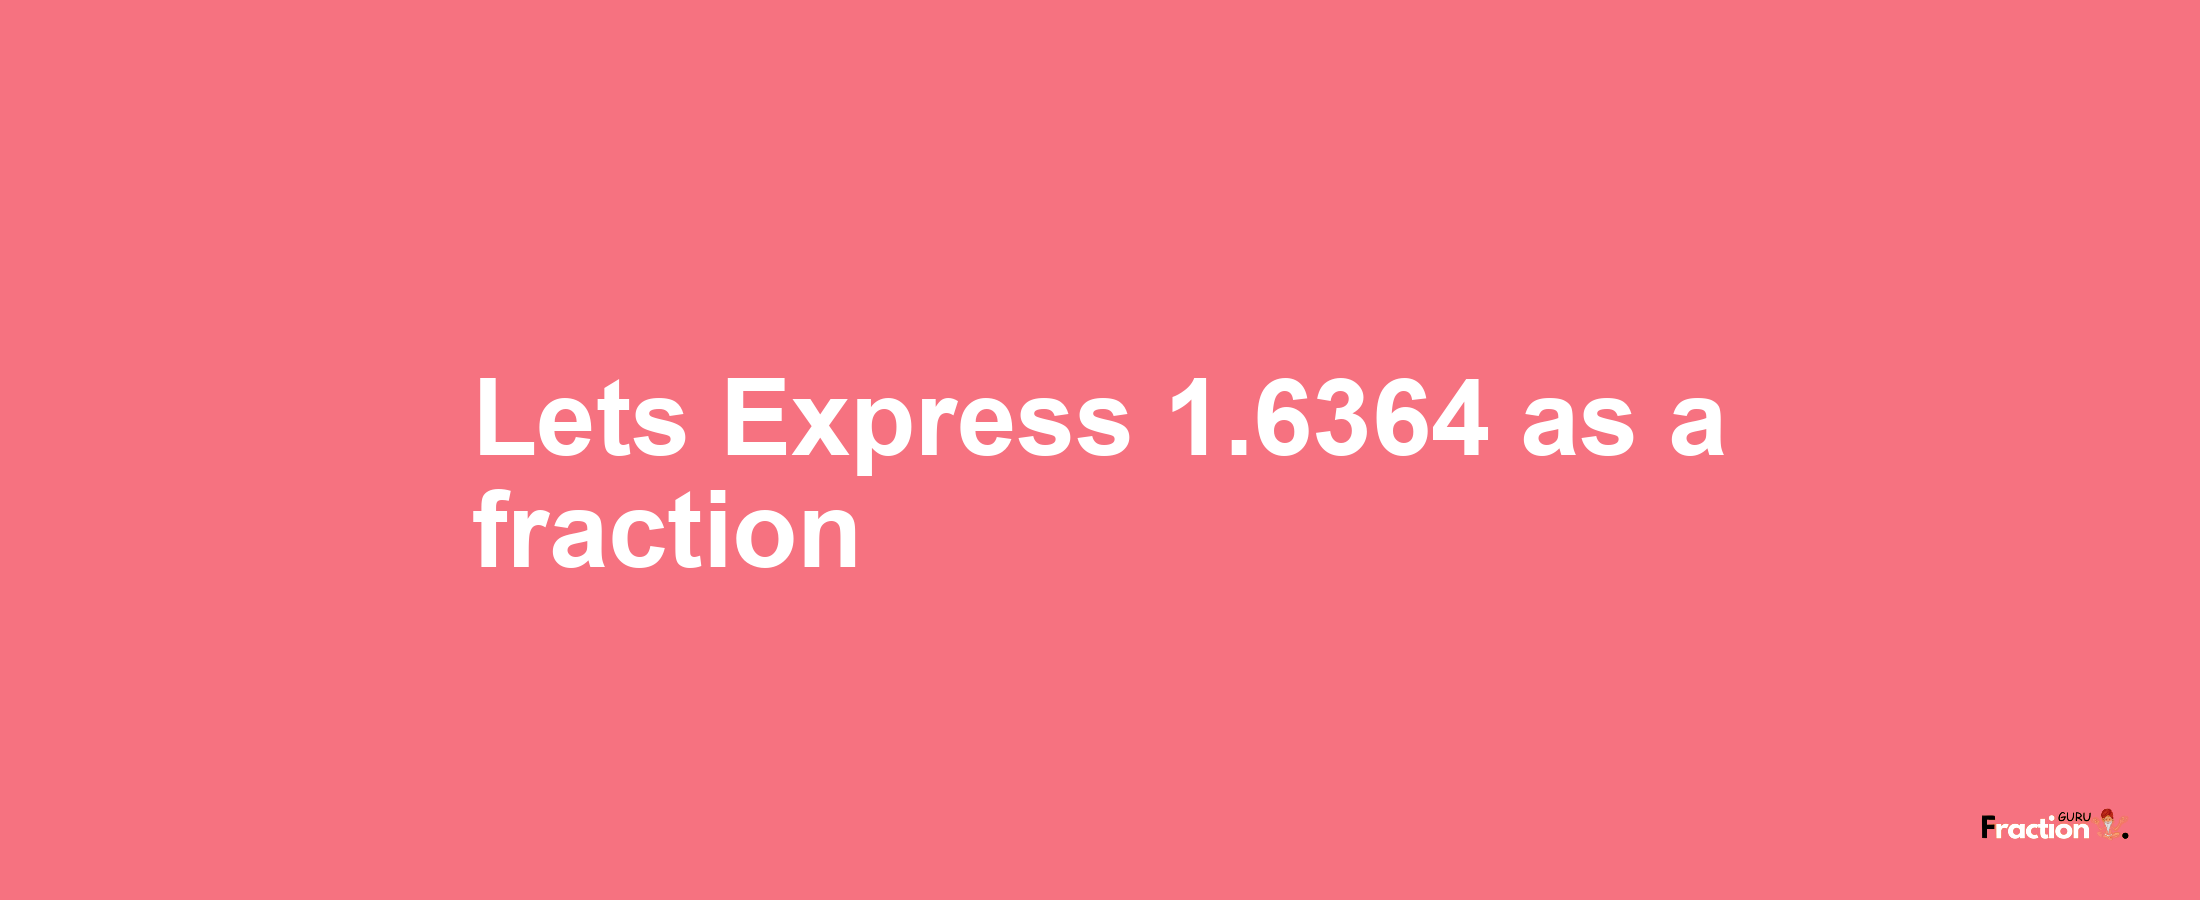 Lets Express 1.6364 as afraction